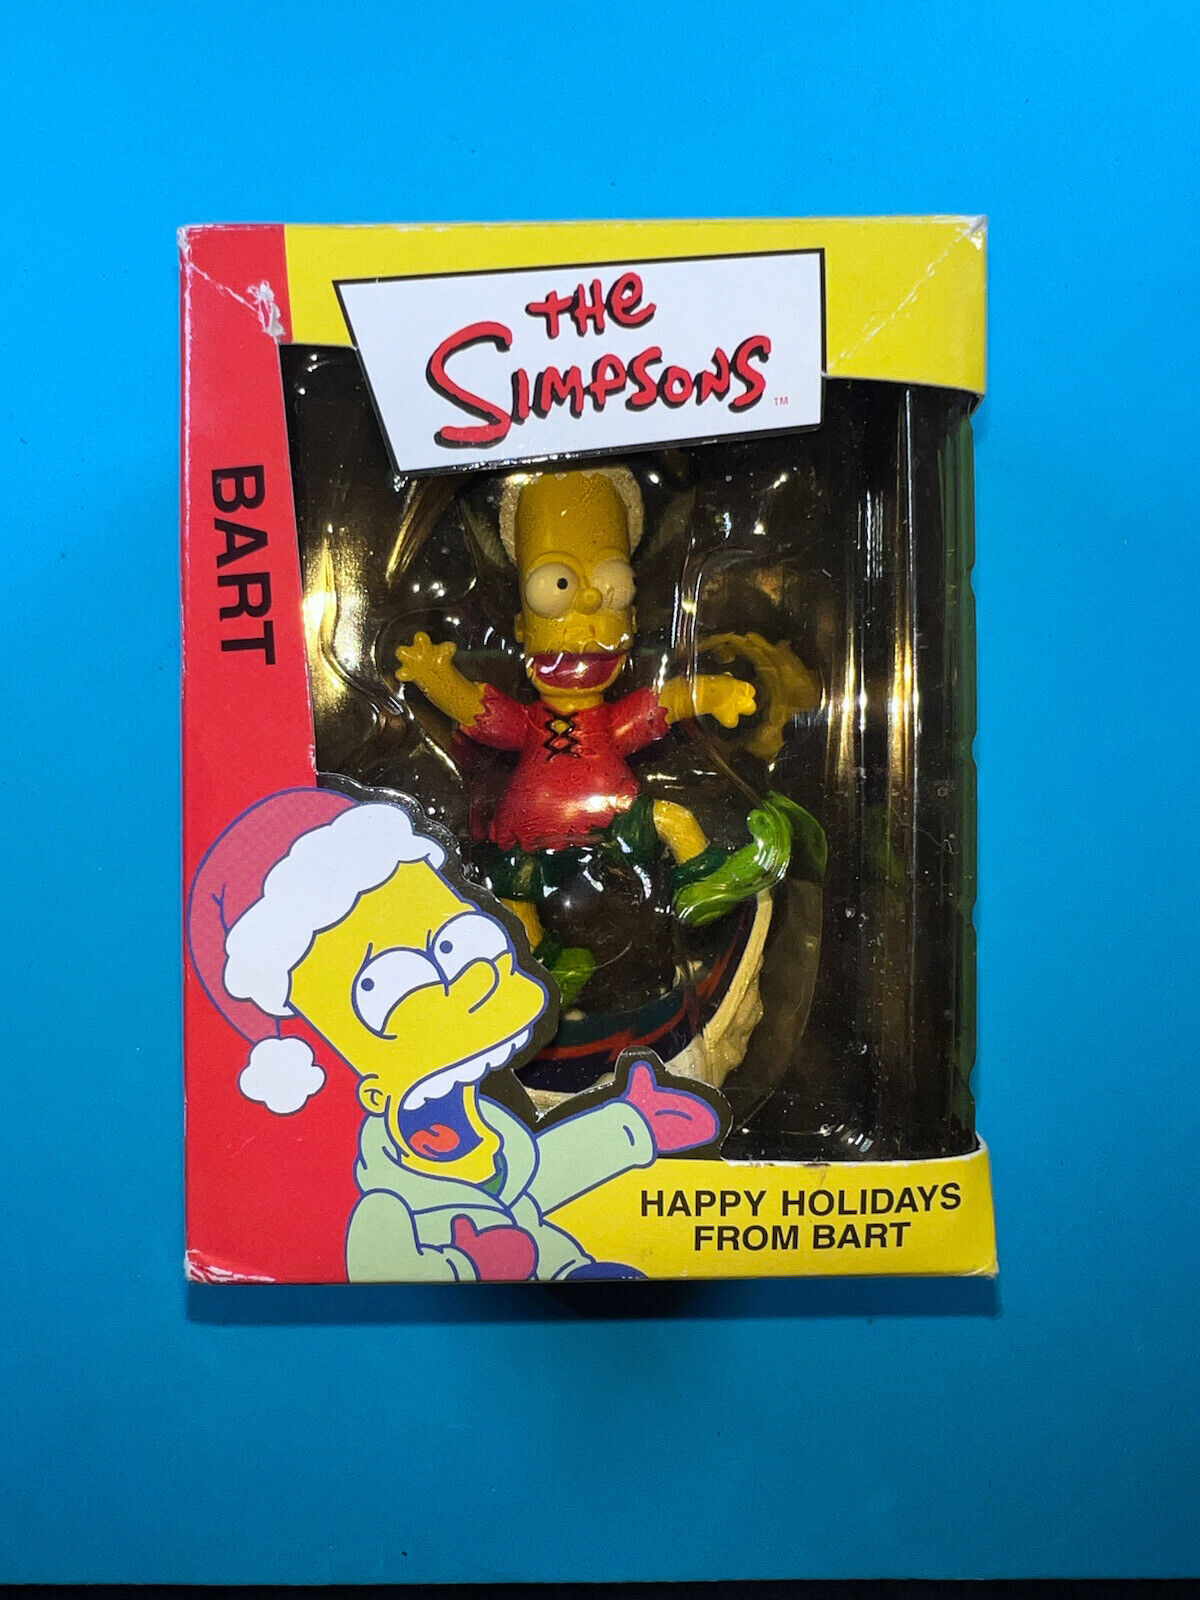 The Simpsons 2003 Happy Holidays From Bart Christmas Ornament American Greetings